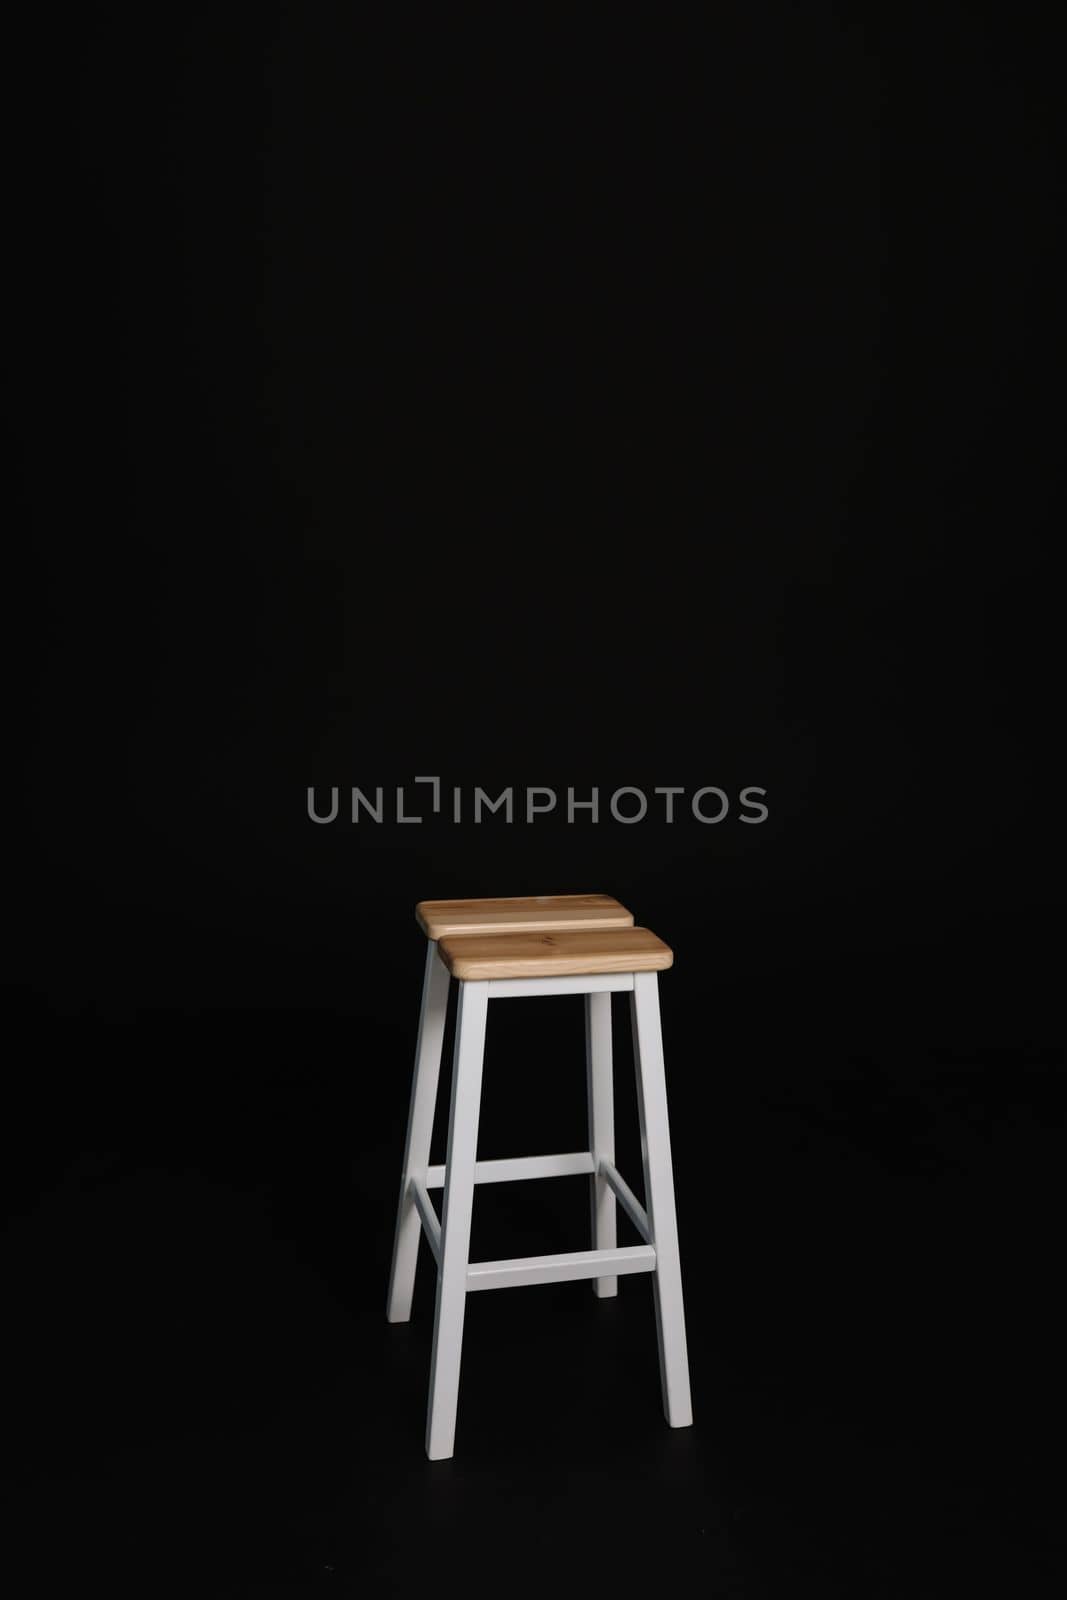 minimalistic wooden chair against black background. Concept modern interior and design furniture in room. High stool in loft style. Retro Bar chair. Vintage wooden metal chair